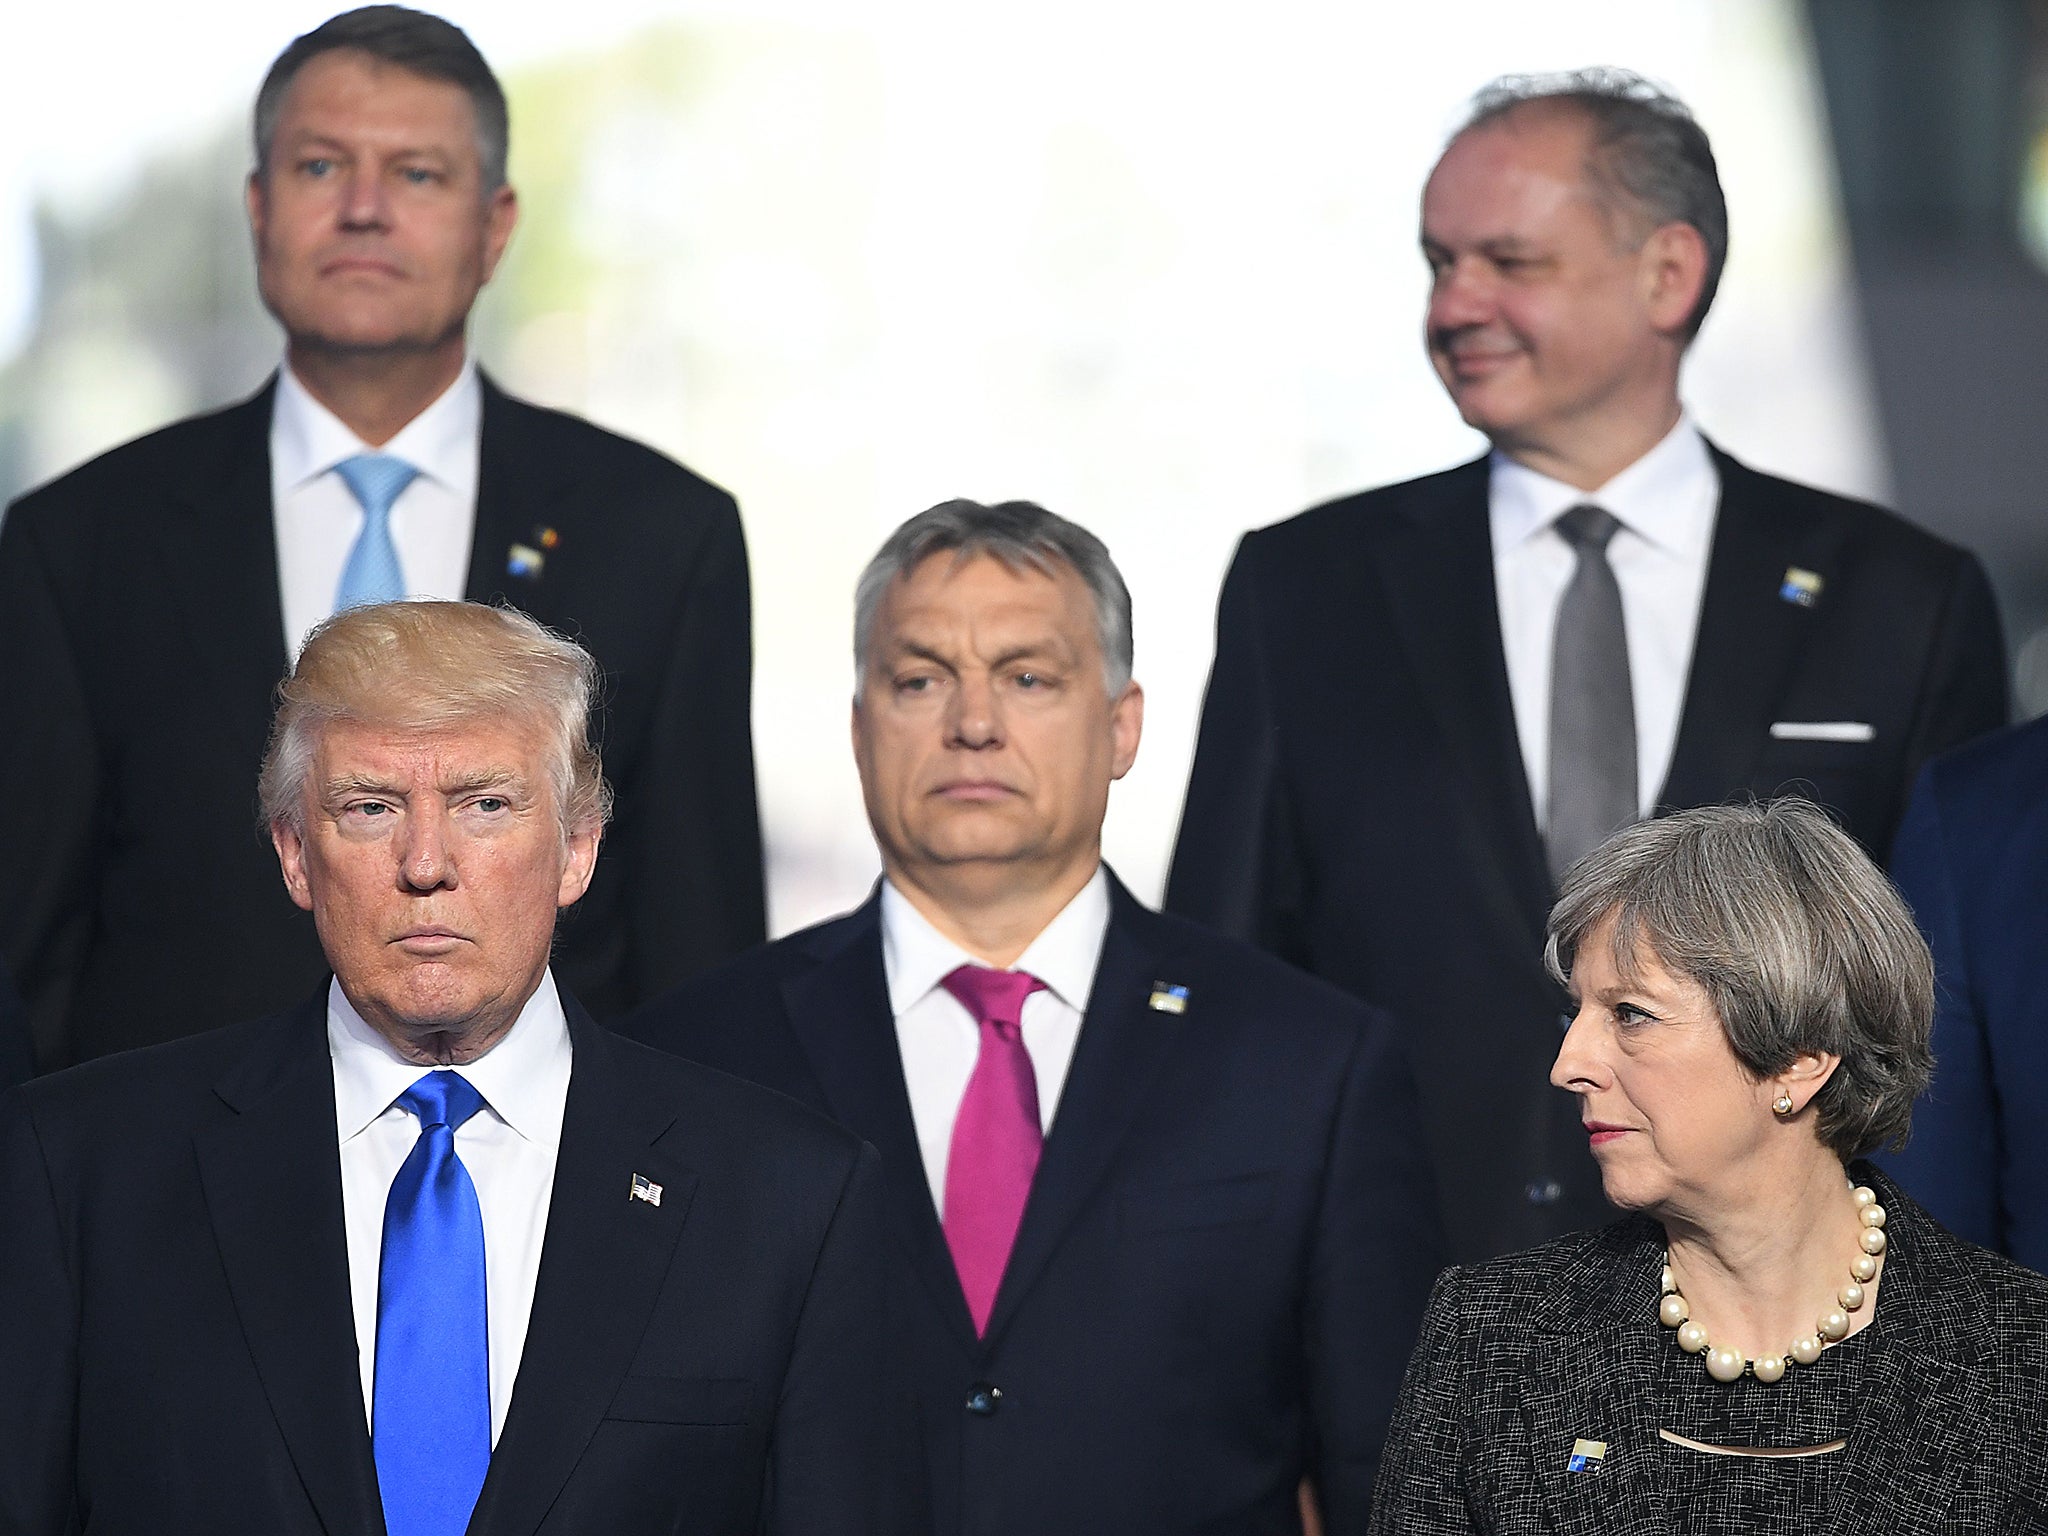 US President Donald Trump, Hungarian Prime Minister Viktor Orban and British Prime Minister Theresa May, pose for a picture during the NATO (North Atlantic Treaty Organization) summit at the NATO headquarters, in Brussels